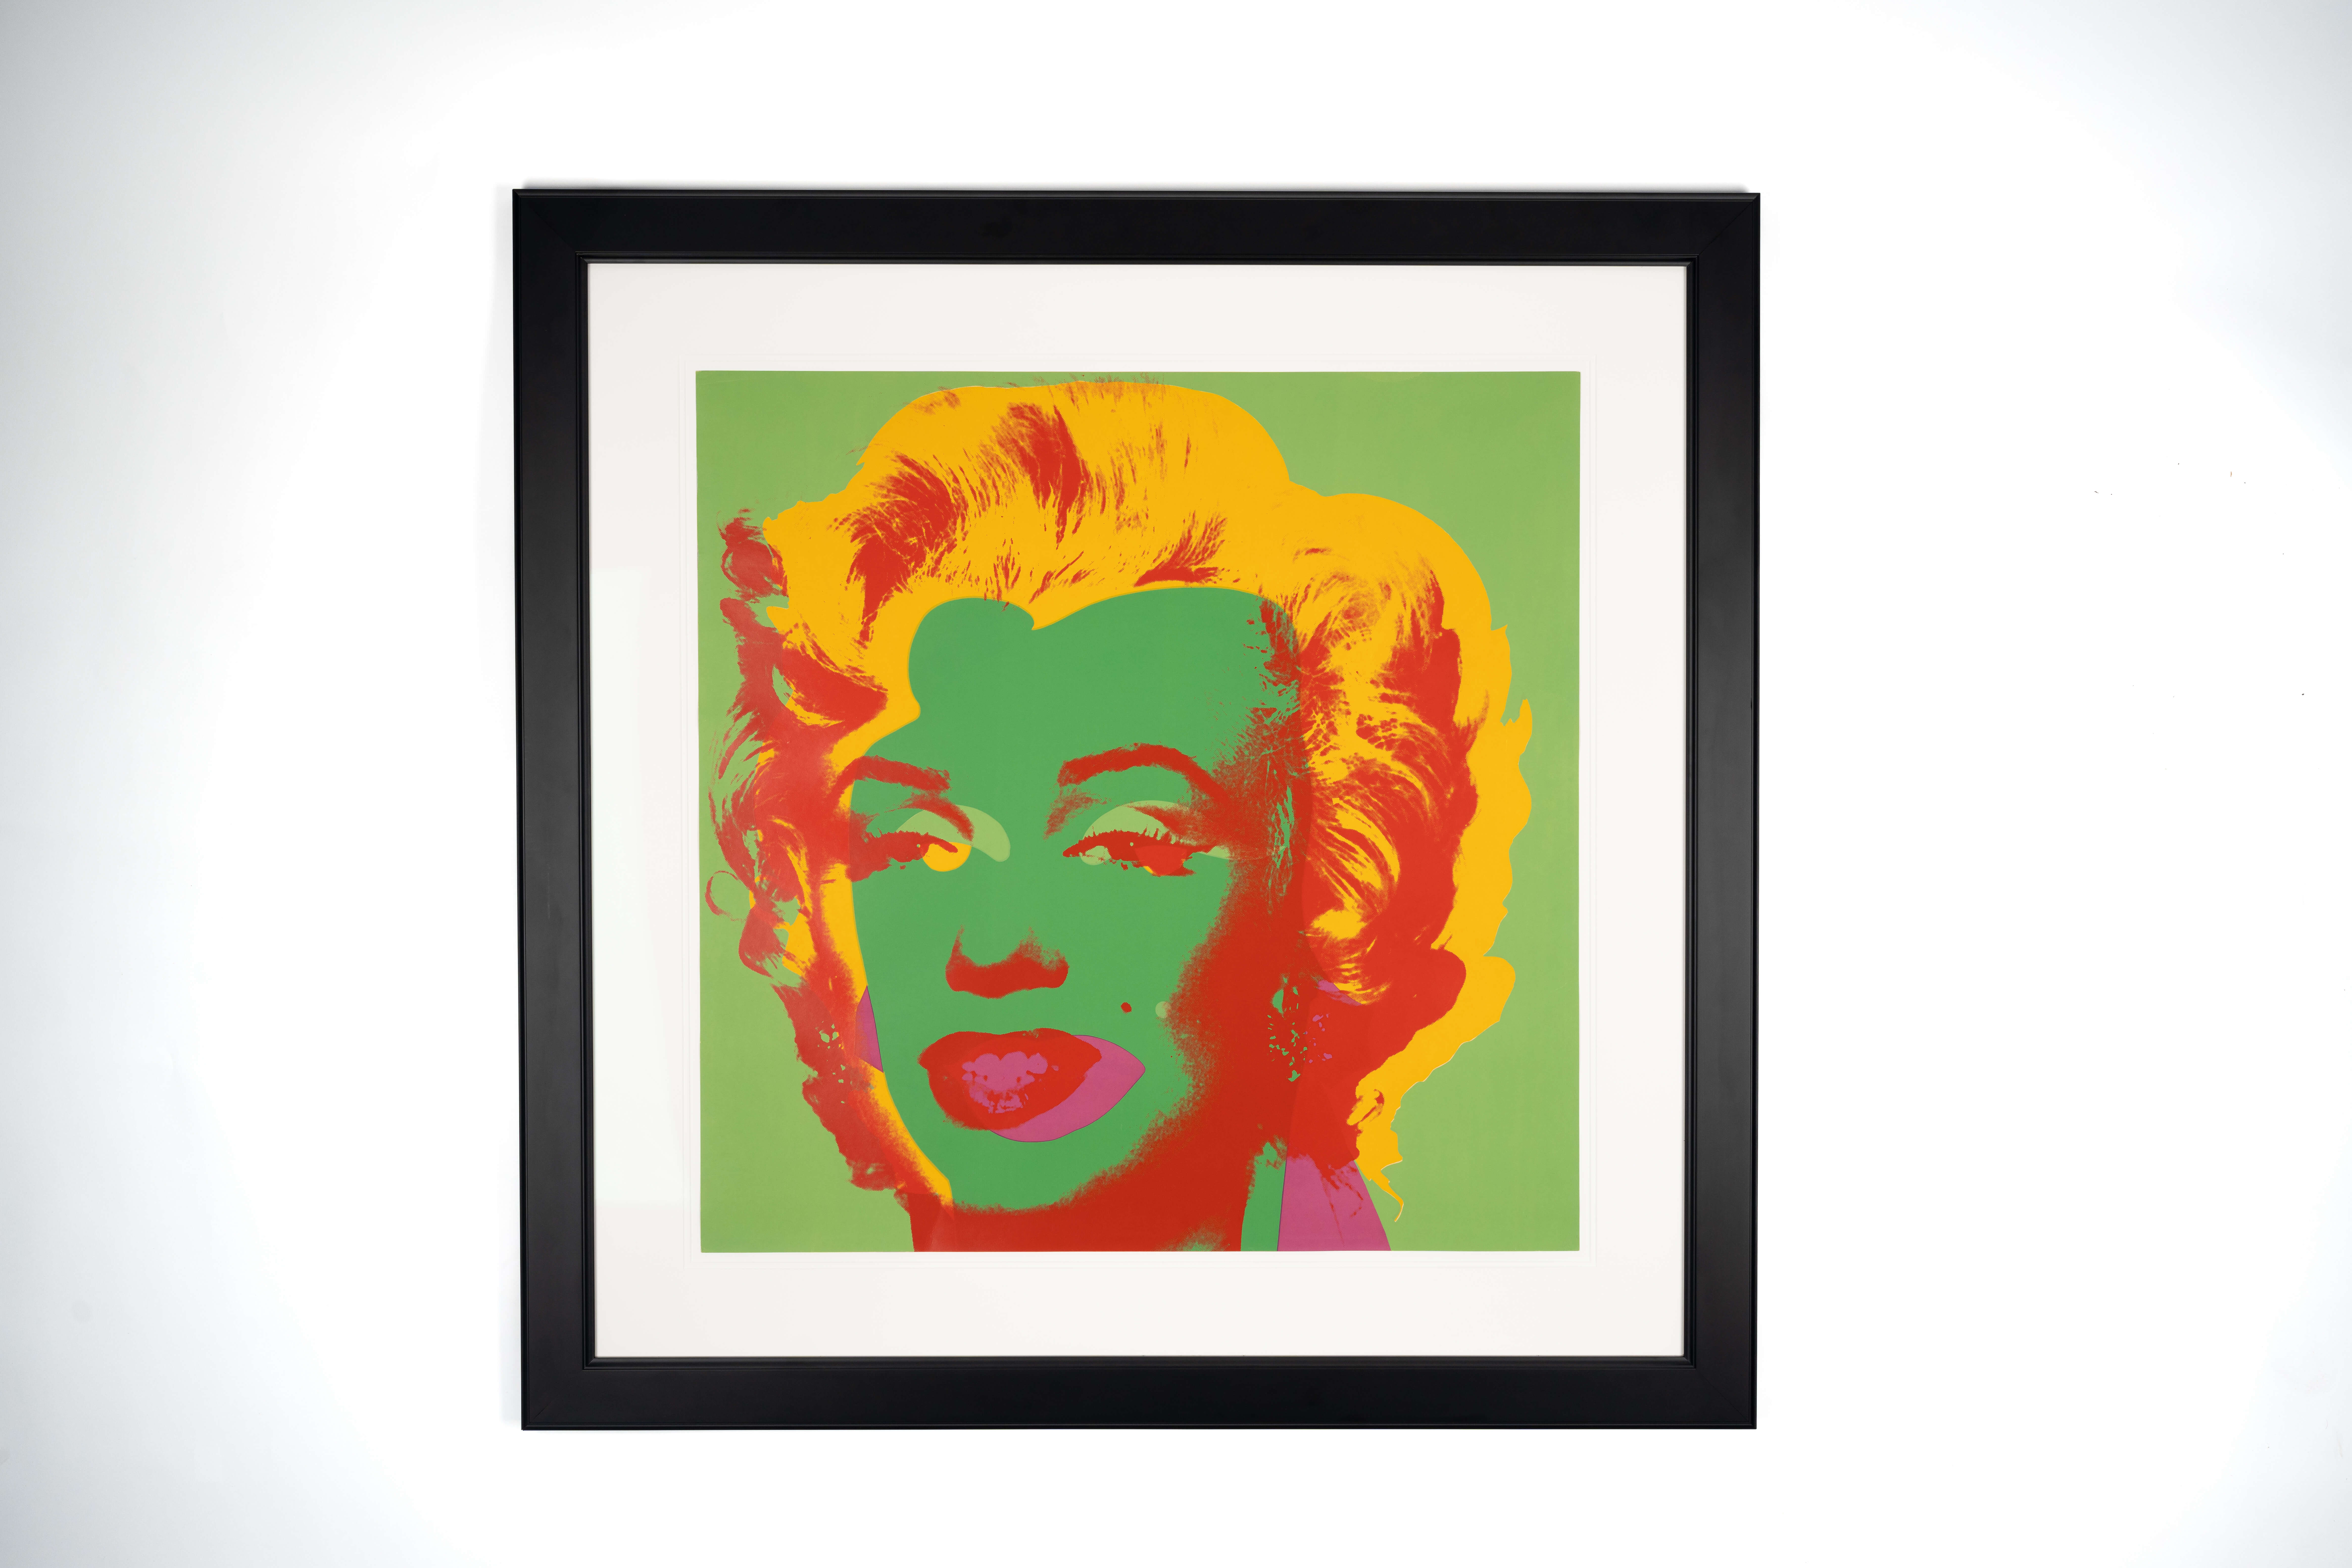 Rally’s Marilyn Monroe (Marilyn 25), 1967 by Andy Warhol. Number 14 in a black frame